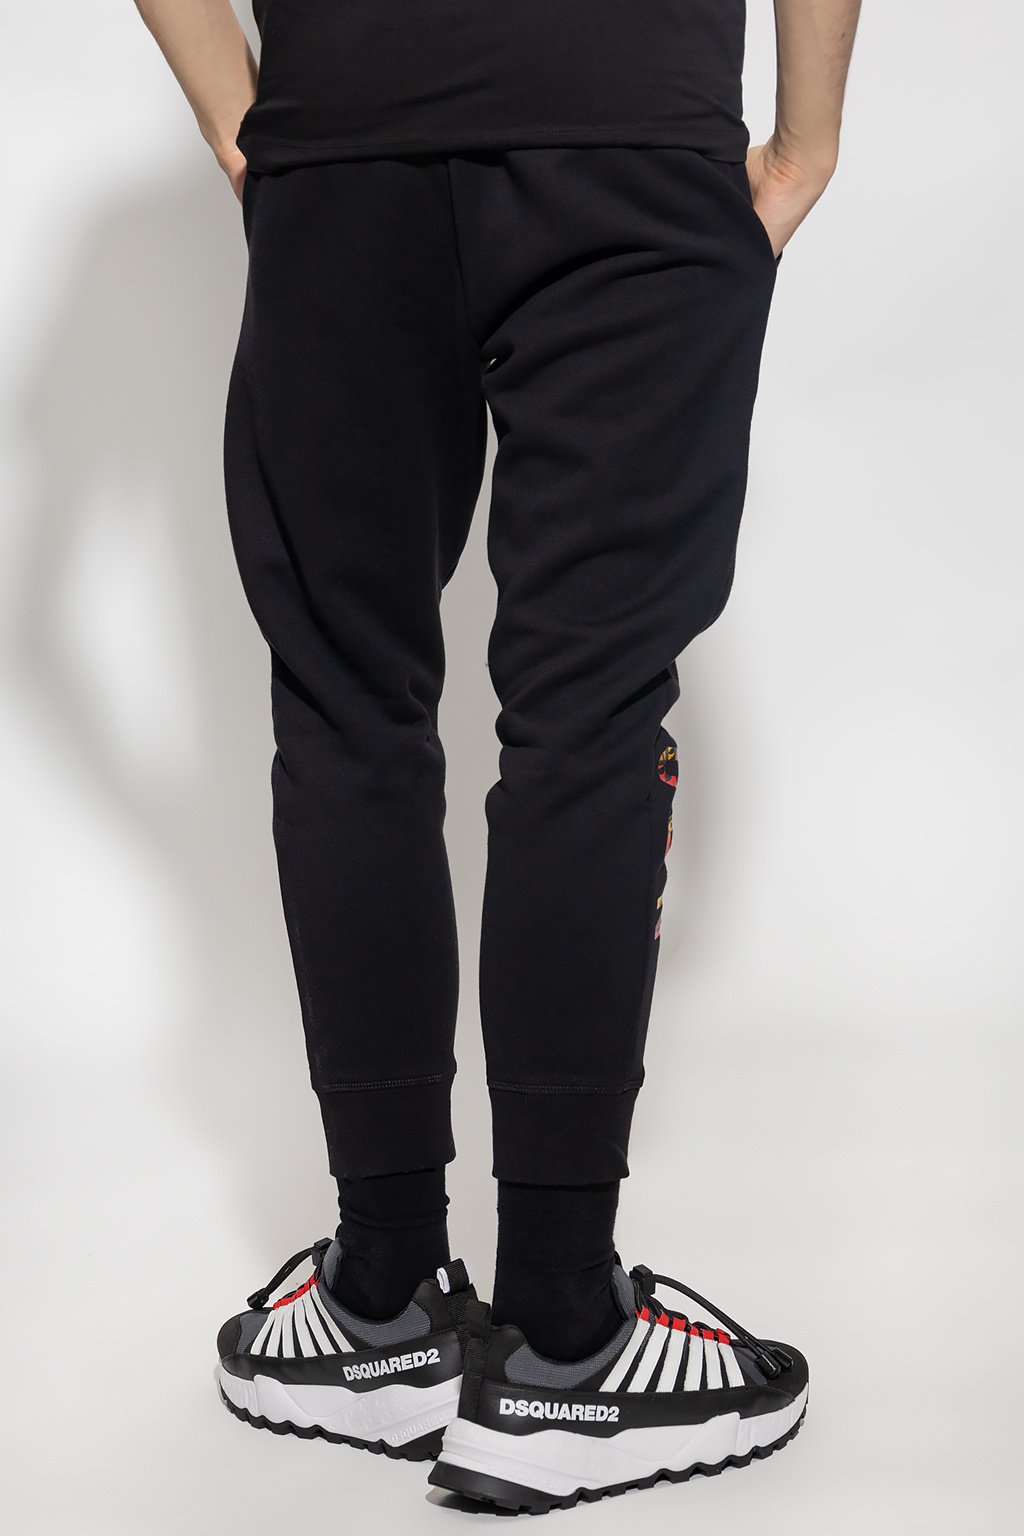 Dsquared2 AREA Track Pants for Women